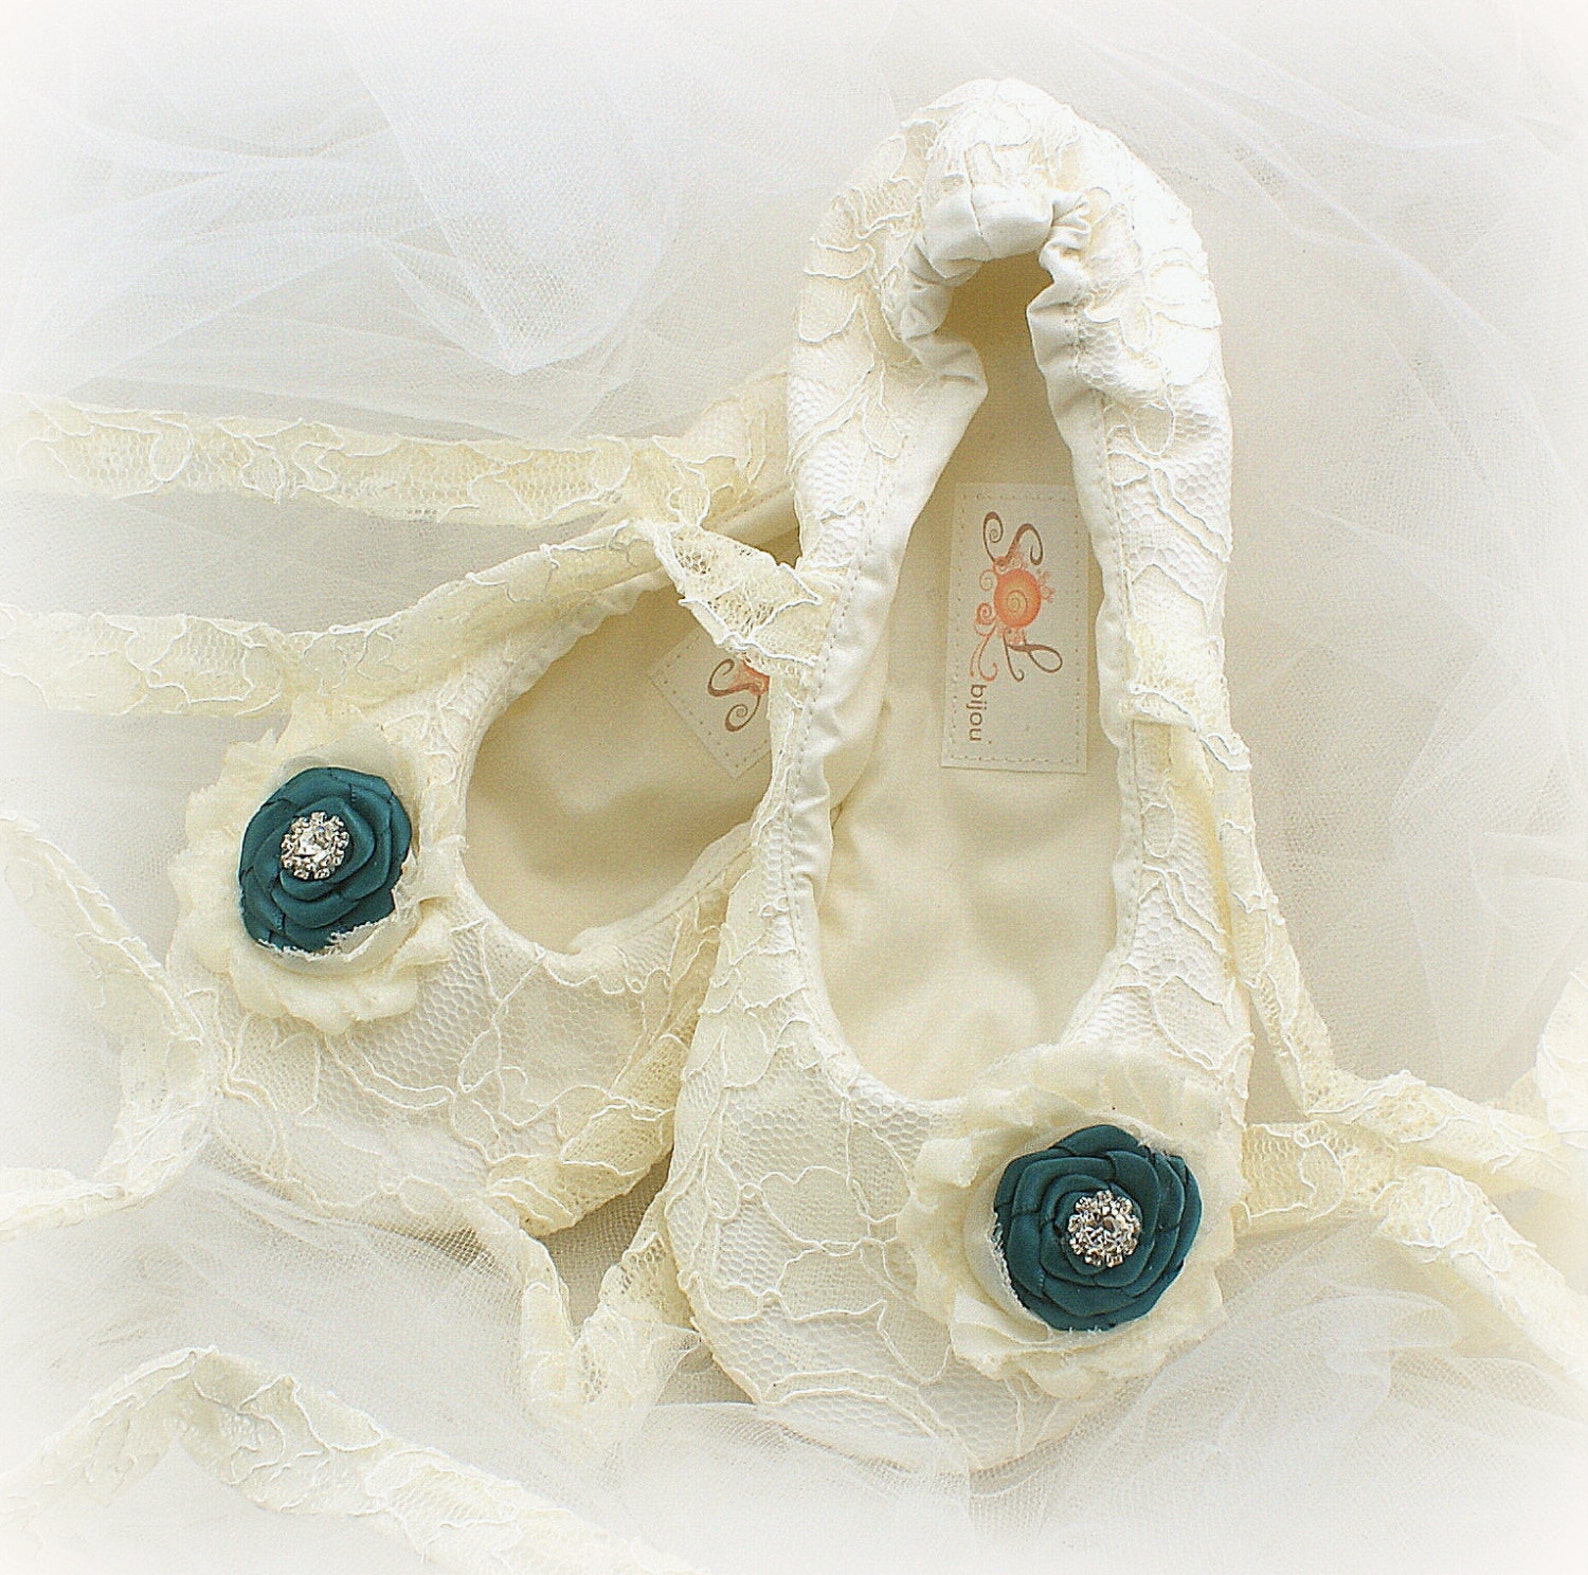 ballet flats, ivory, teal, bridal flats, wedding shoes, flats, lace up, ballerina slippers, flower girl, crystals, lace, vintage